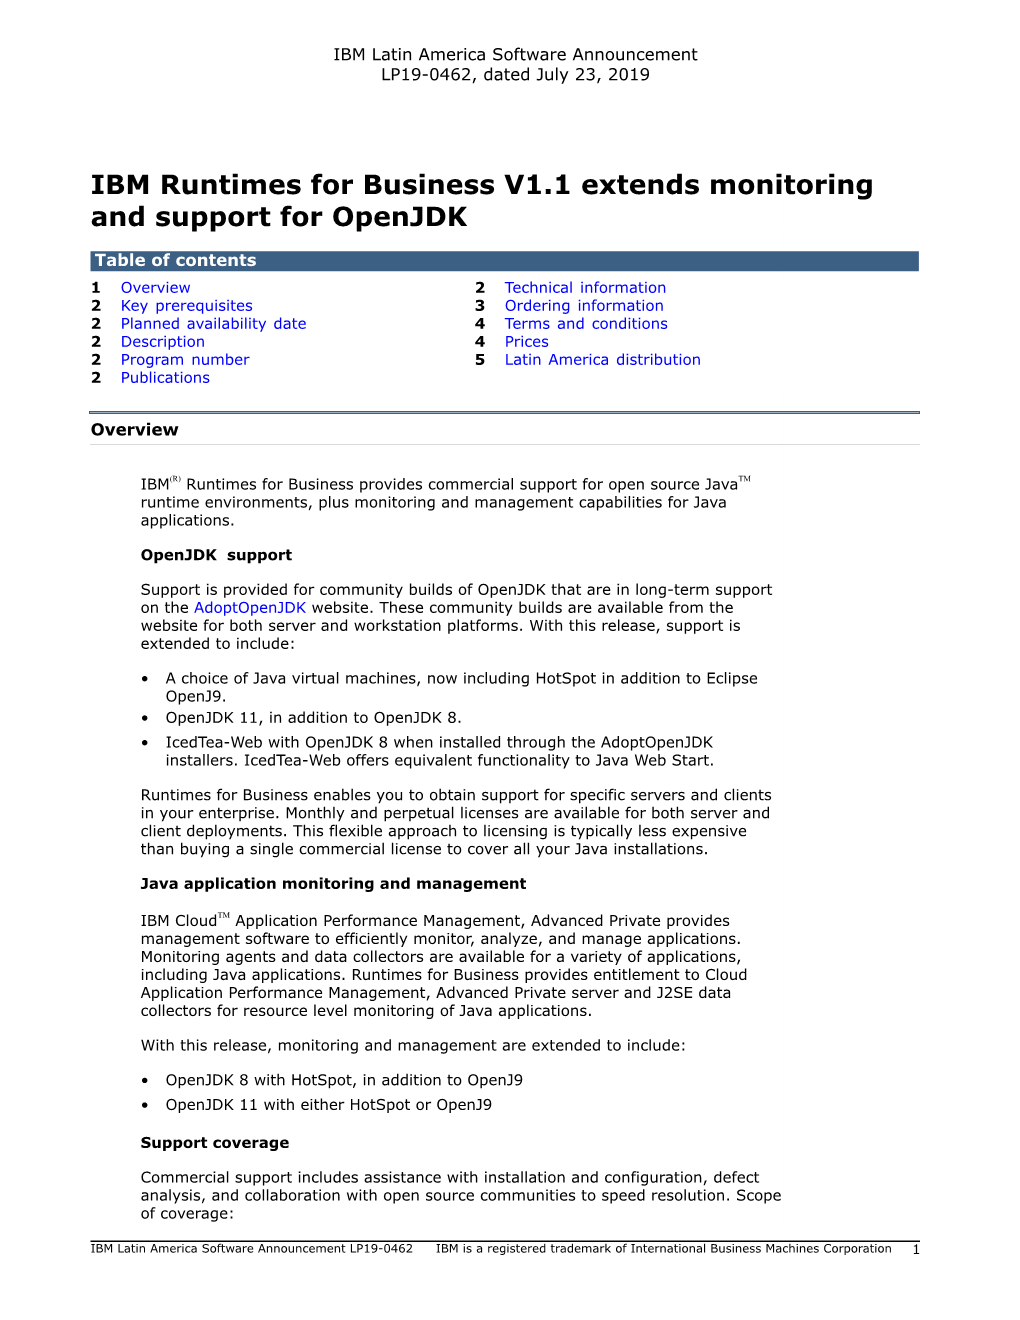 IBM Runtimes for Business V1.1 Extends Monitoring and Support for Openjdk